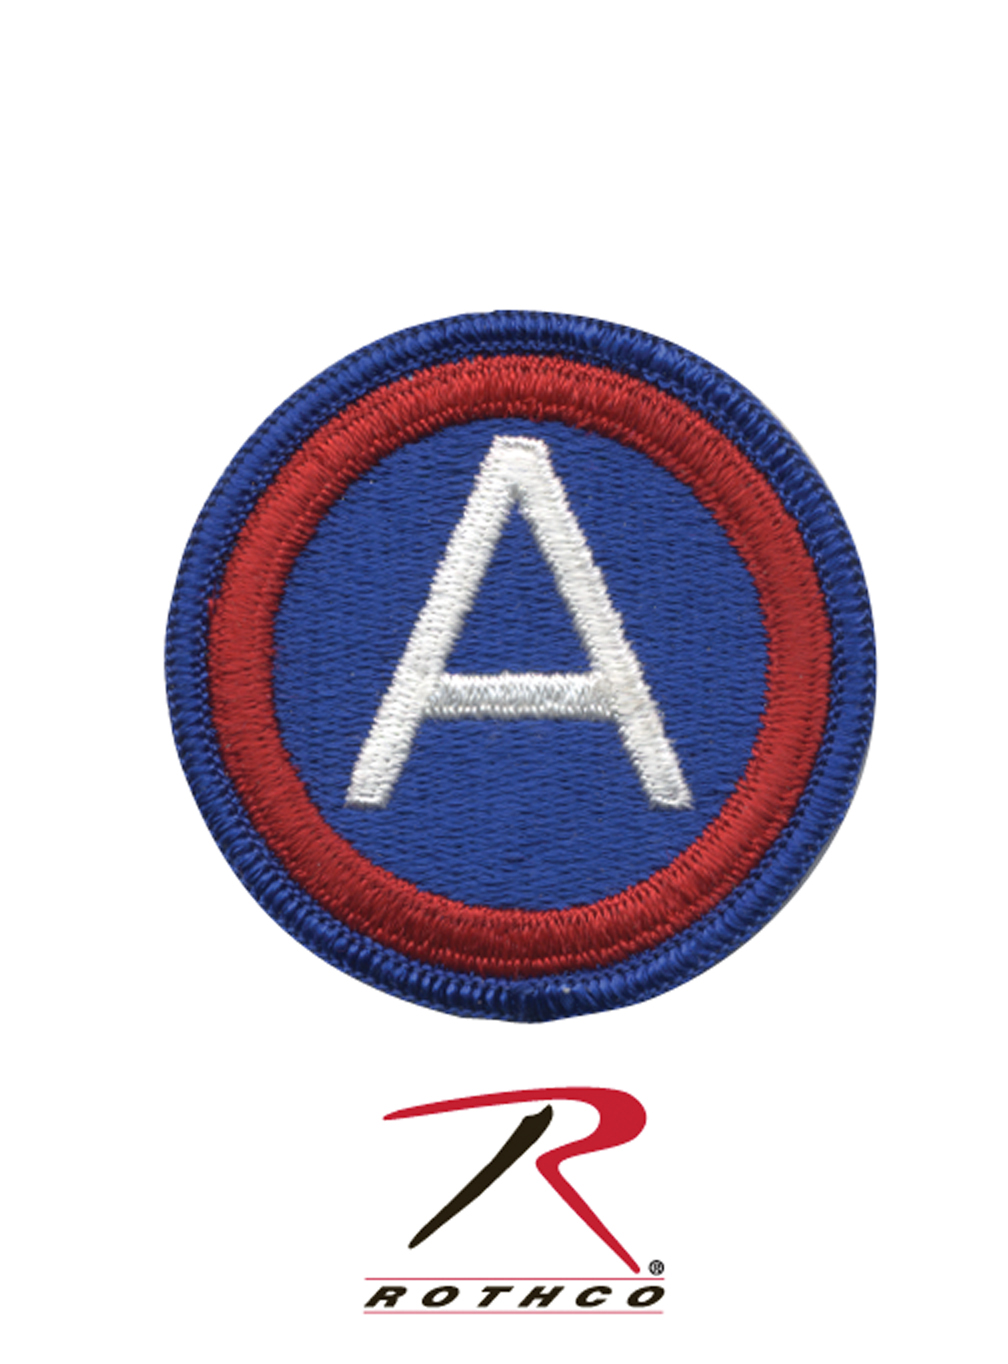 Rothco Patch - 3rd Army